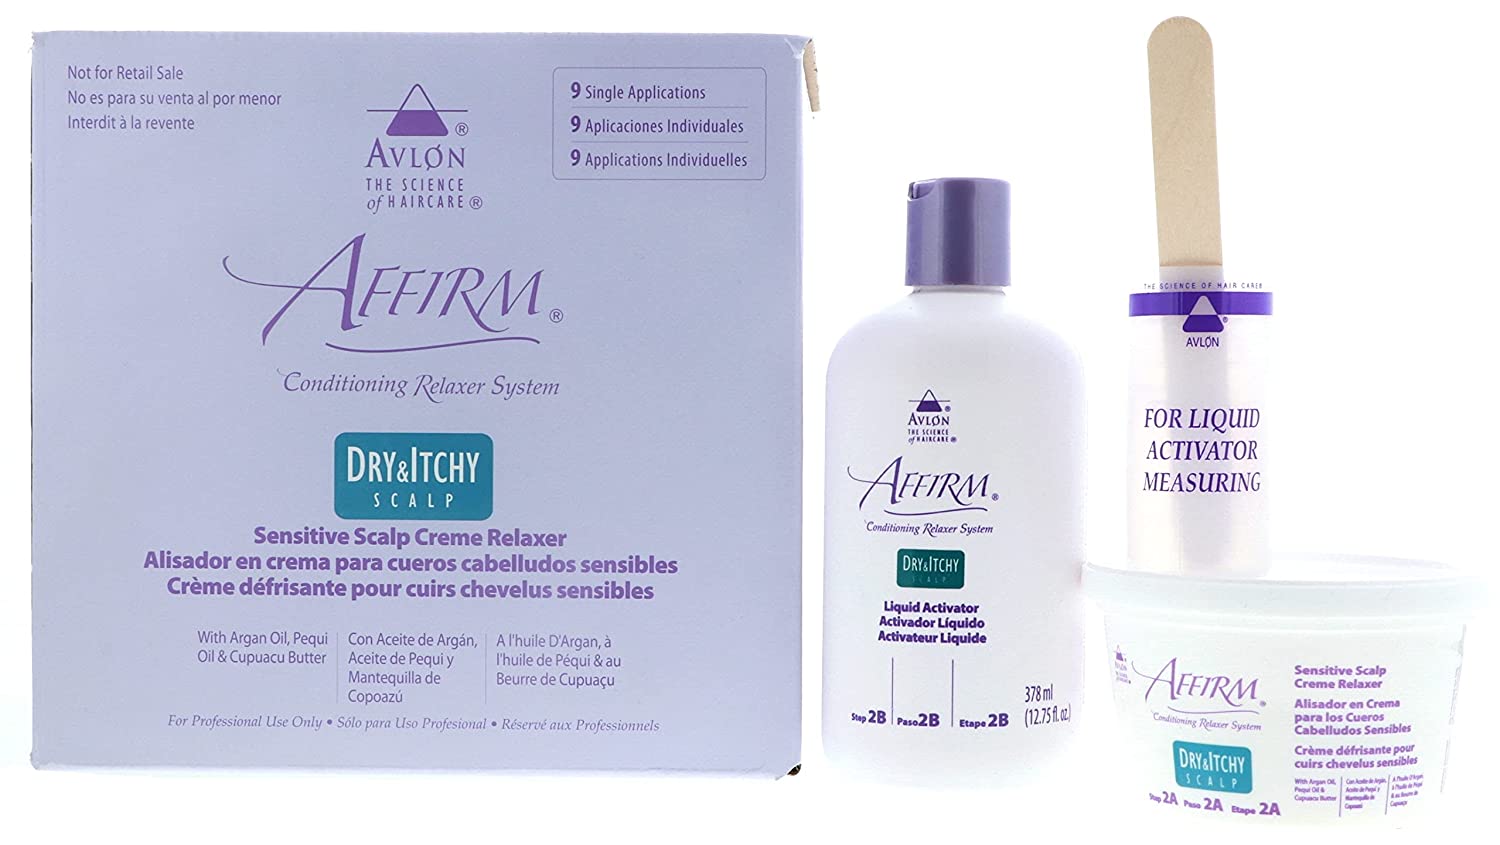 AVLON AFFIRM DRY ITCHY CONDITIONING RELAXER SYSTEM 4.90 OZ